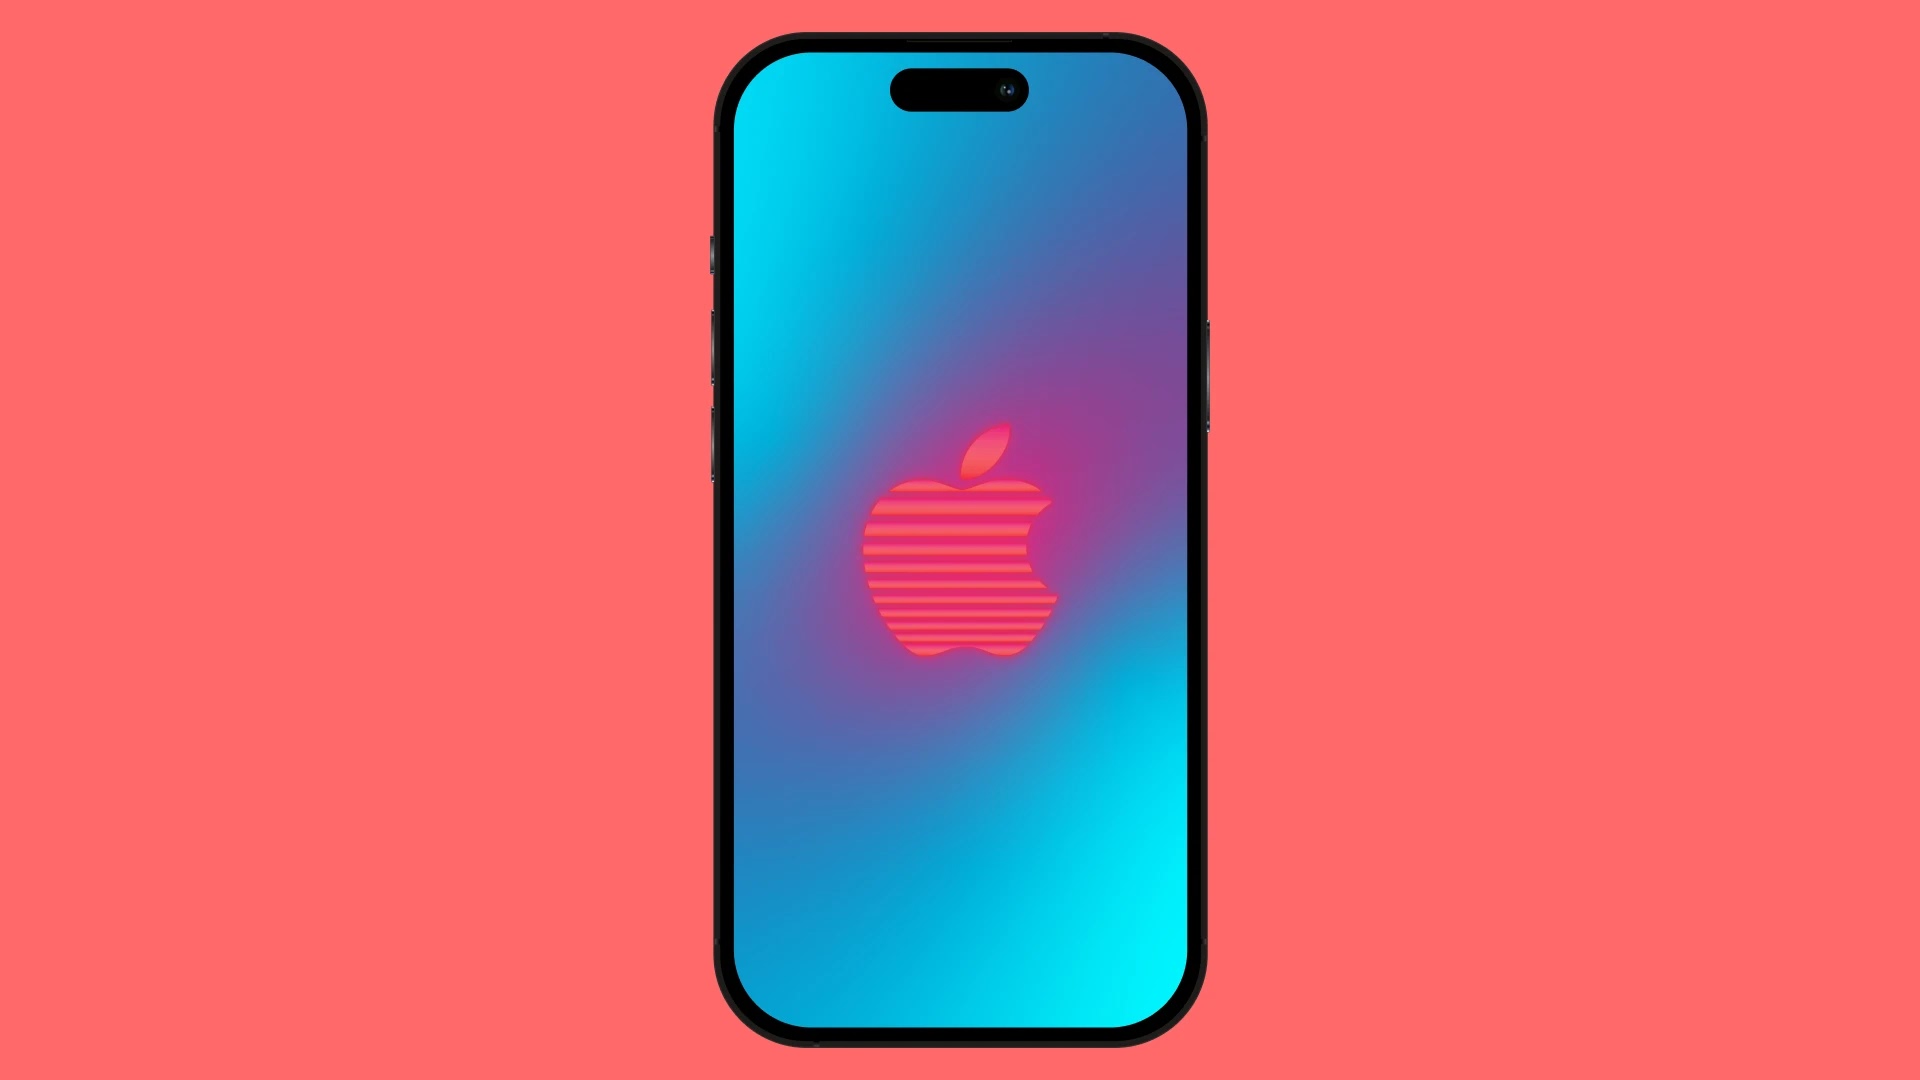 iPhone wallpaper - Apple Synthwave Style